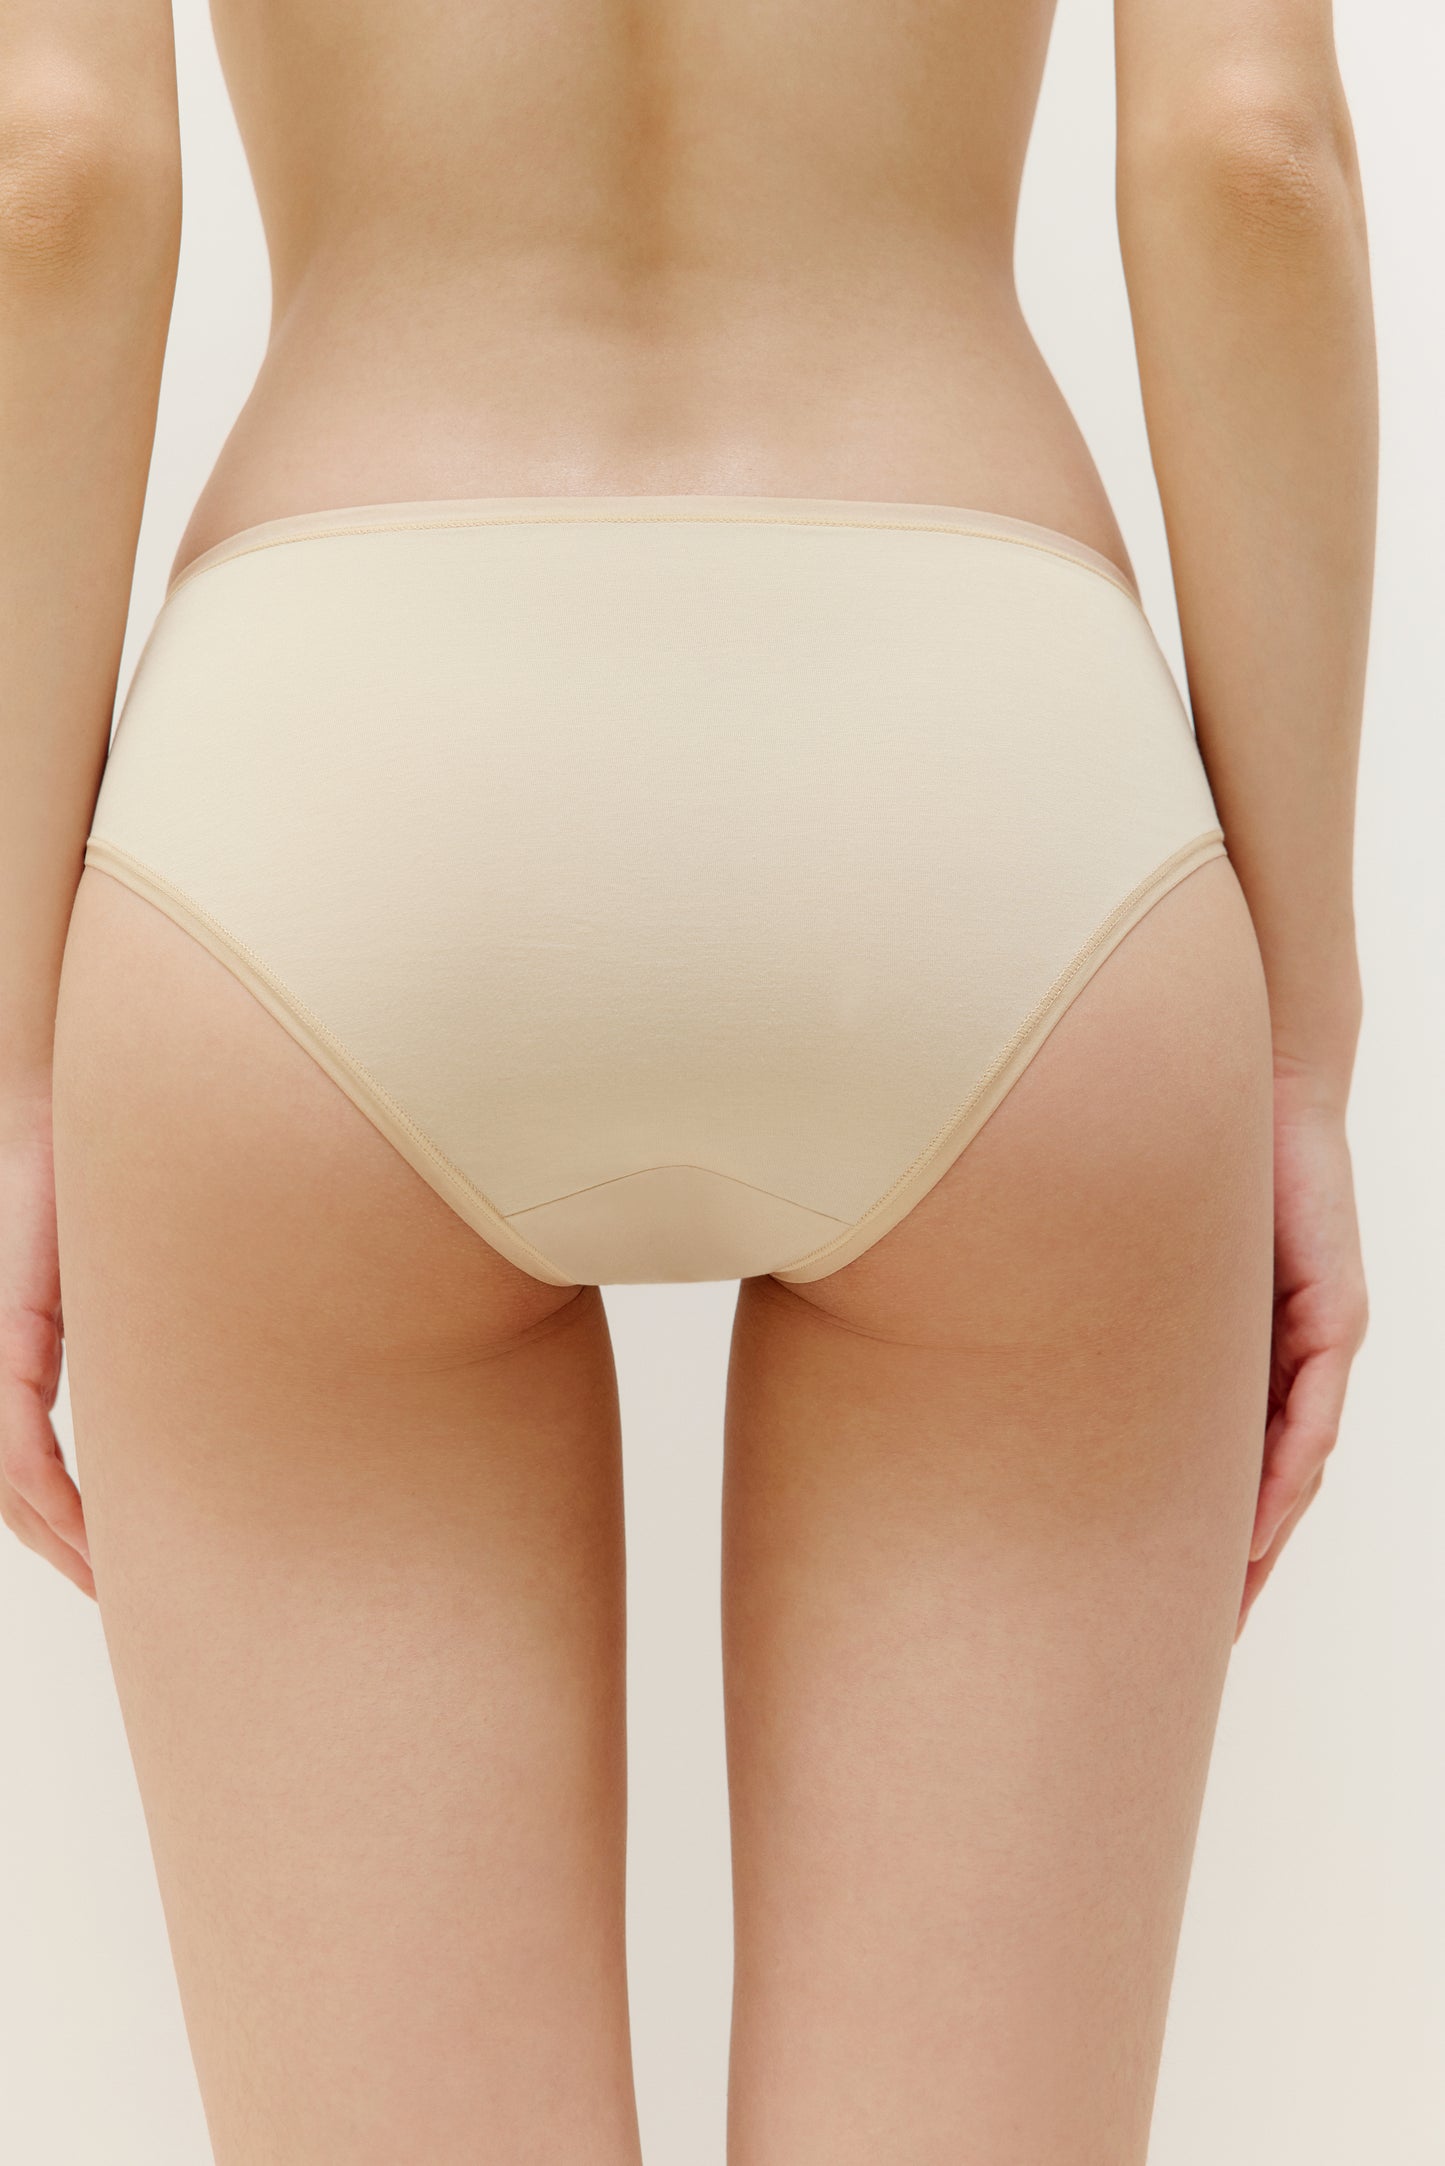 back of woman in tan brief